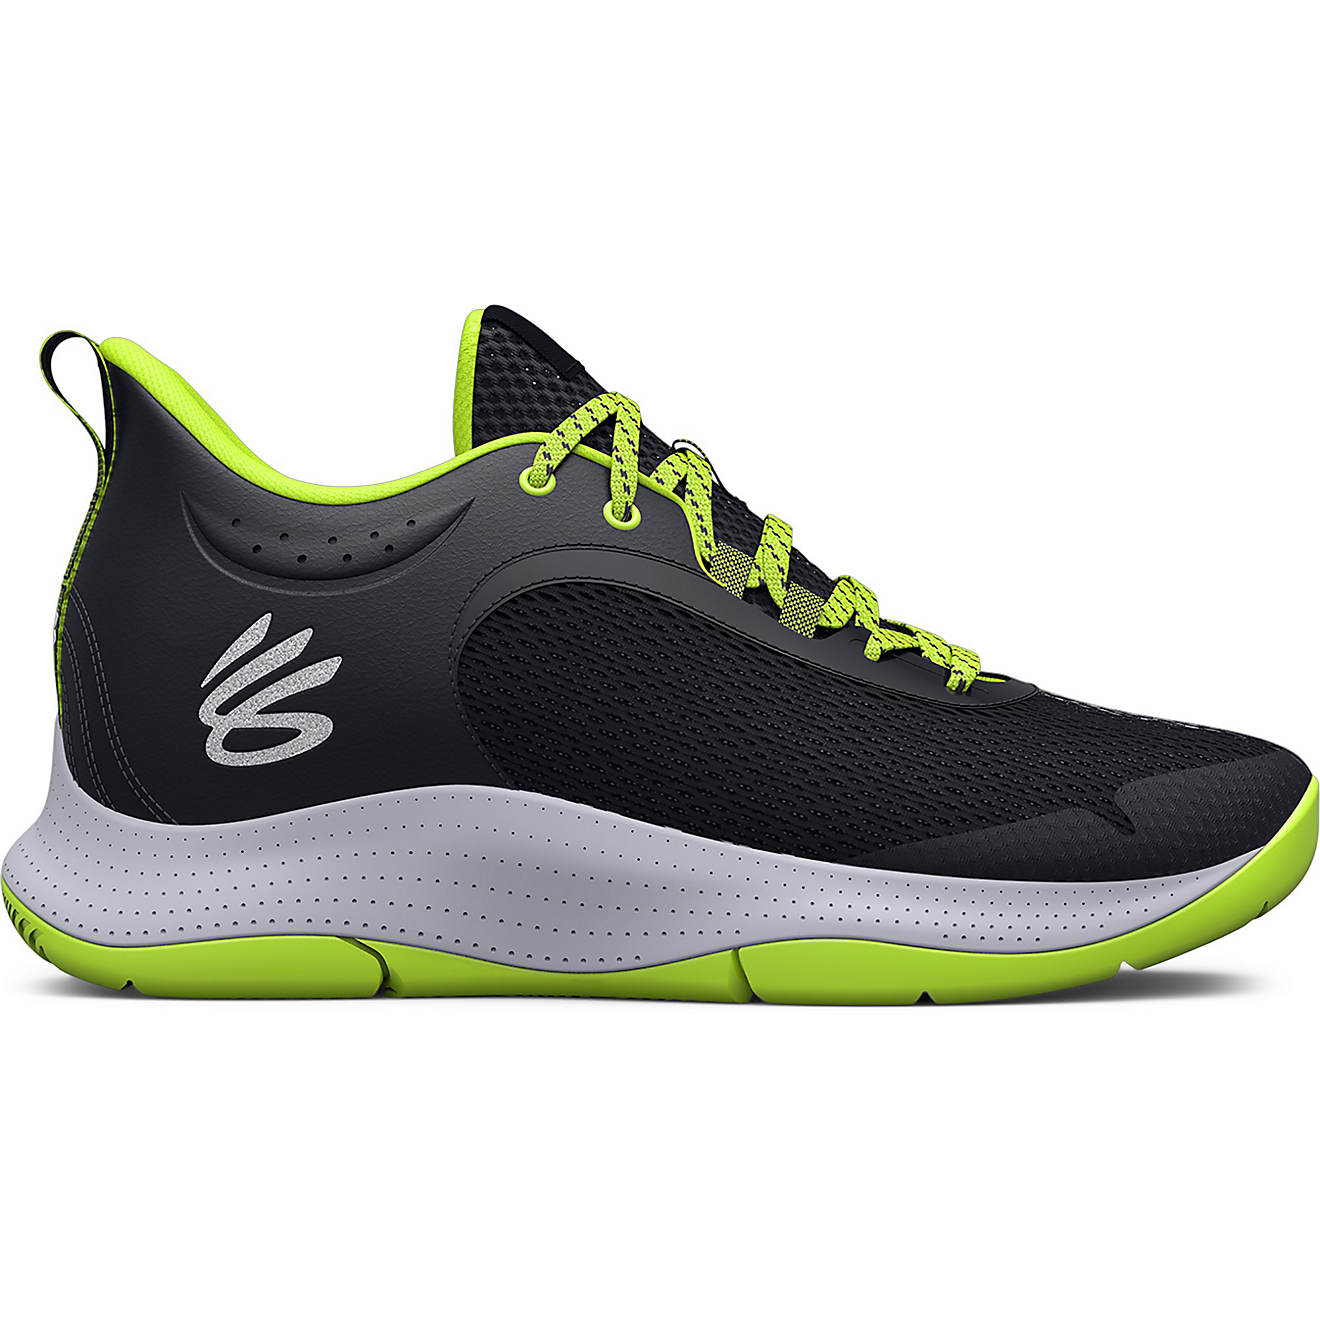 Under Armour Men's Curry 3Z6 Basketball Shoes